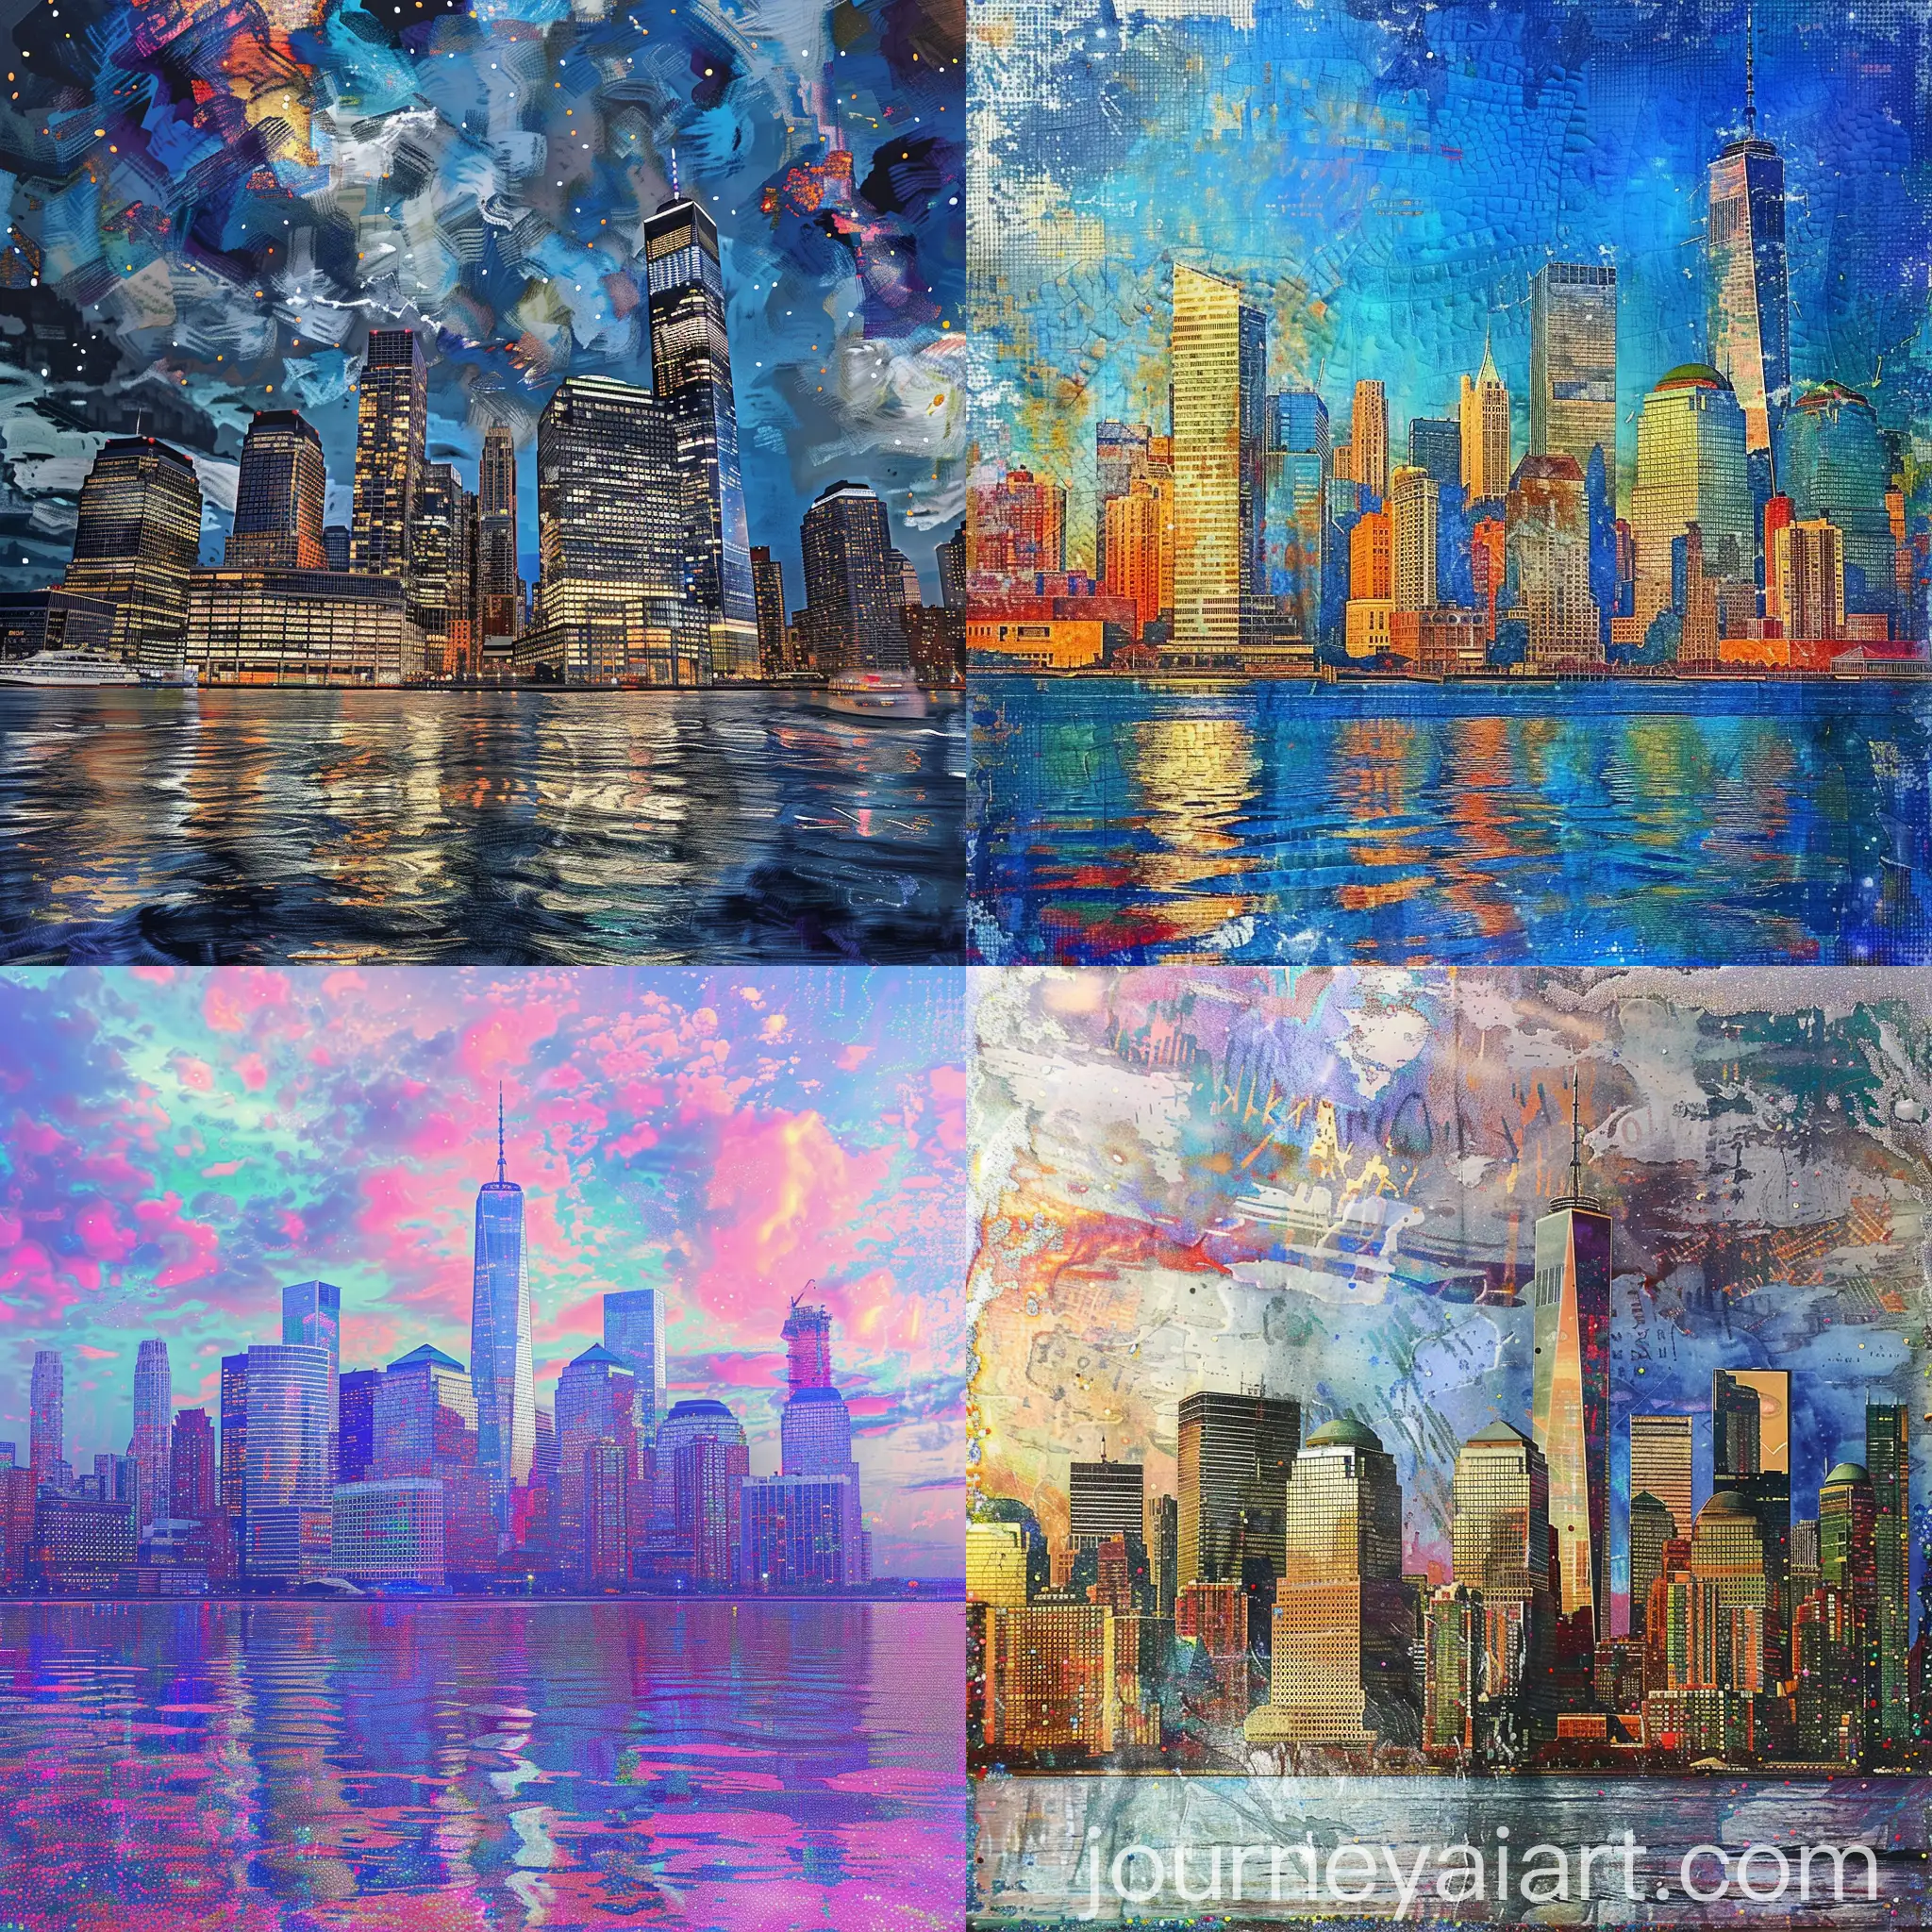 Jersey-City-New-Jersey-Skyline-with-Realistic-Art-Murals-and-Sparkly-Sequin-Textures